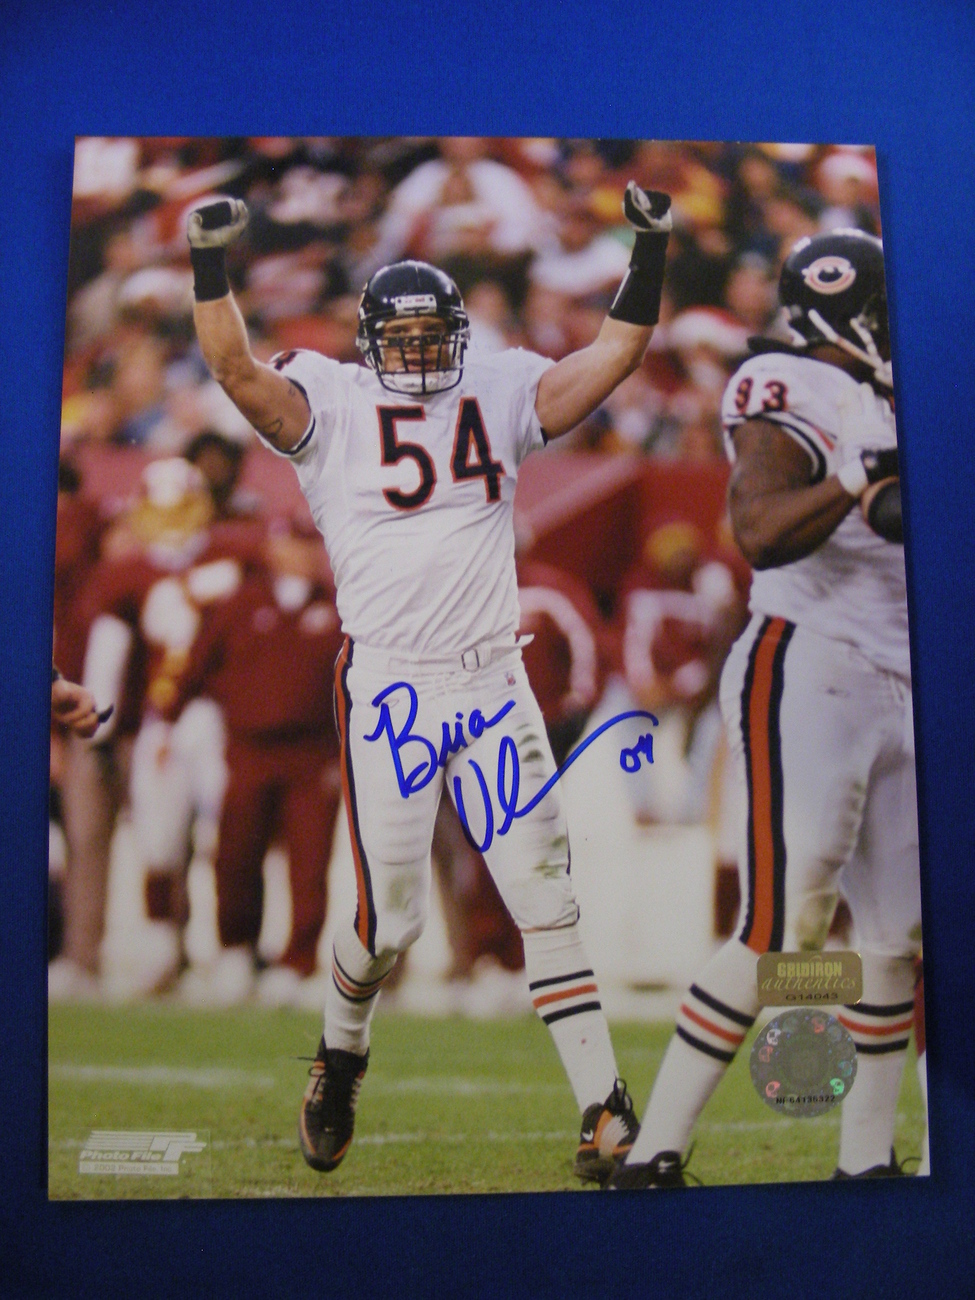 Primary image for BRIAN URLACHER FUTURE FOOTBALL HOF'ER 2000'S ALL-DECADE SIGNED 8X10 GRIDIRON AU